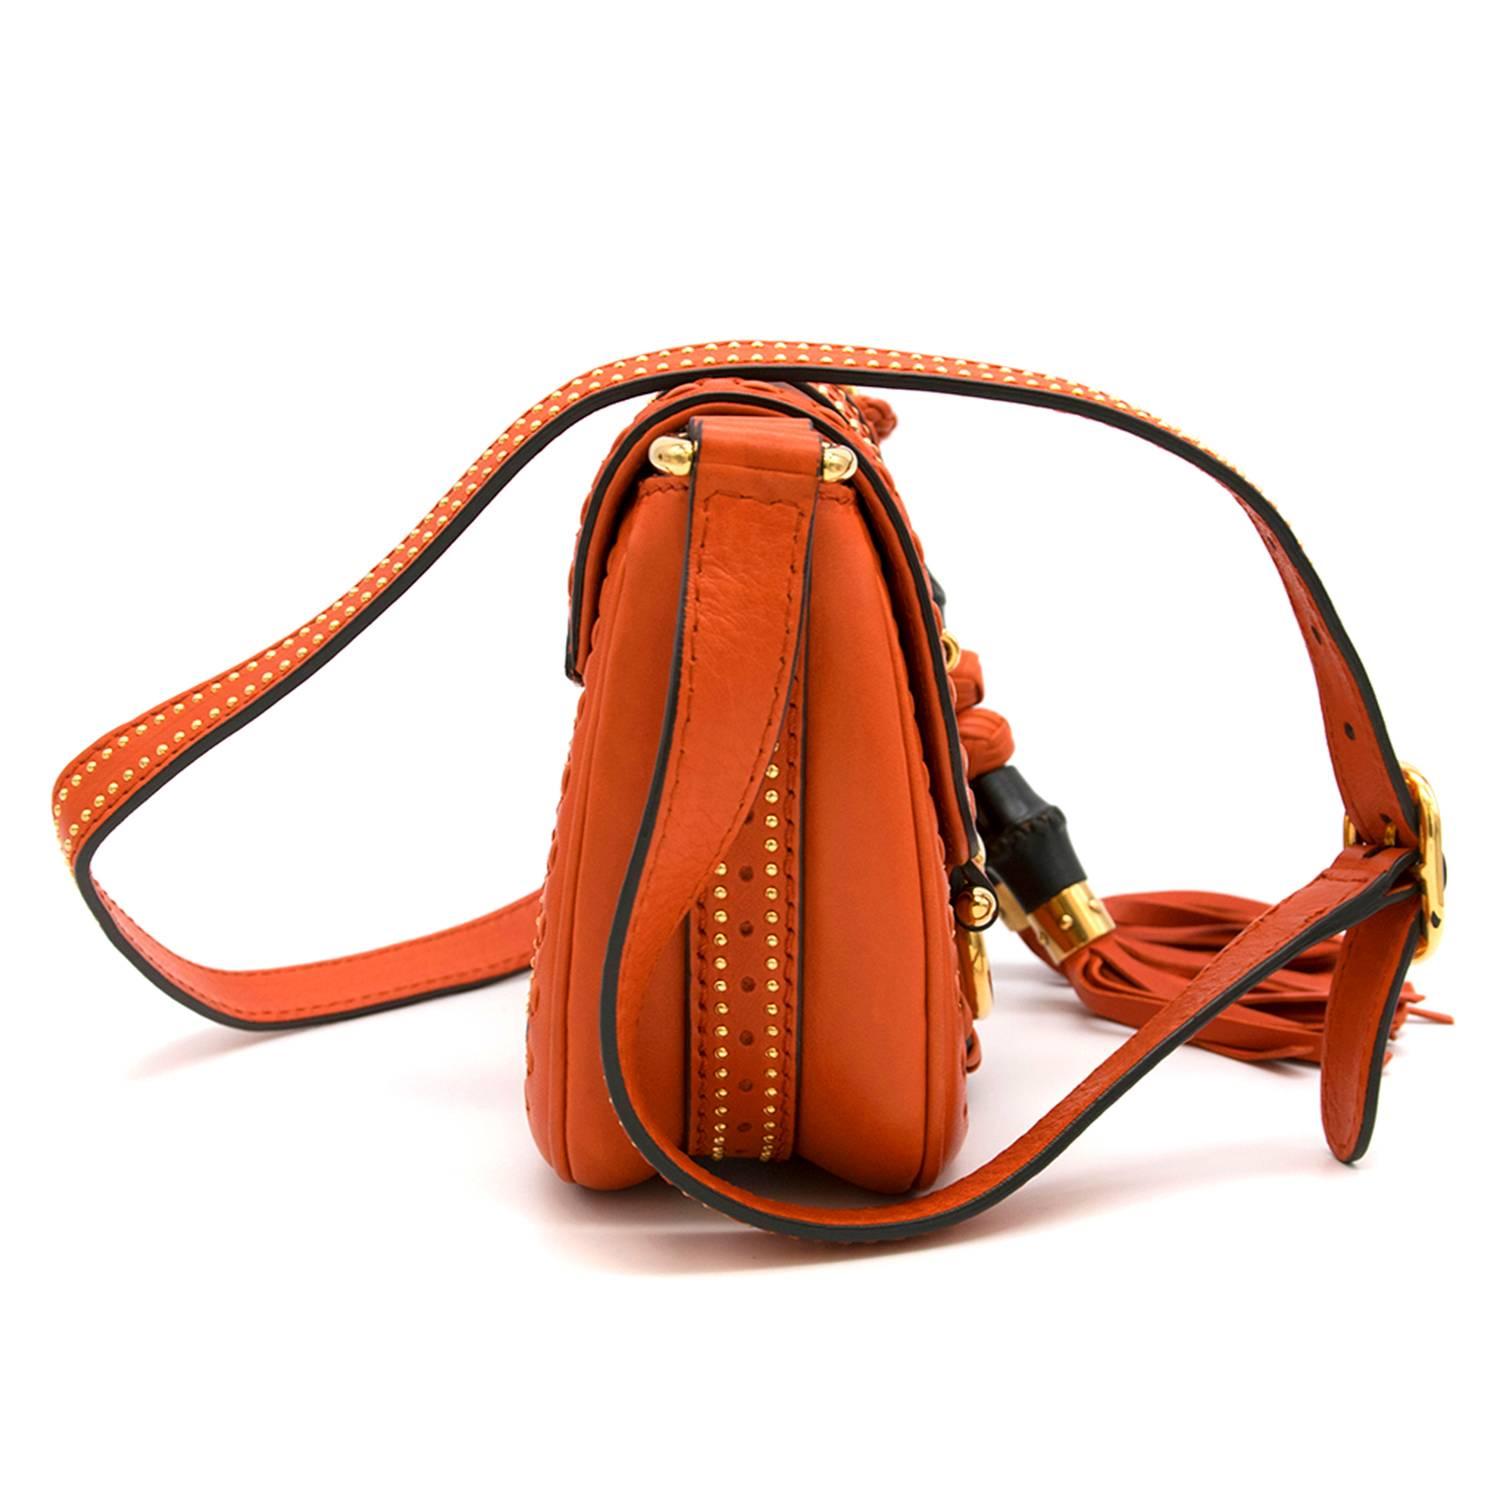 Gucci orange leather mini 'Snaffle Bit' handbag. Top handle with hanging bamboo and knot details, woven panels to the main body of the bag and the edges with gold studs. Gold tone detail on the front on the flap with concealed fastening. Interior